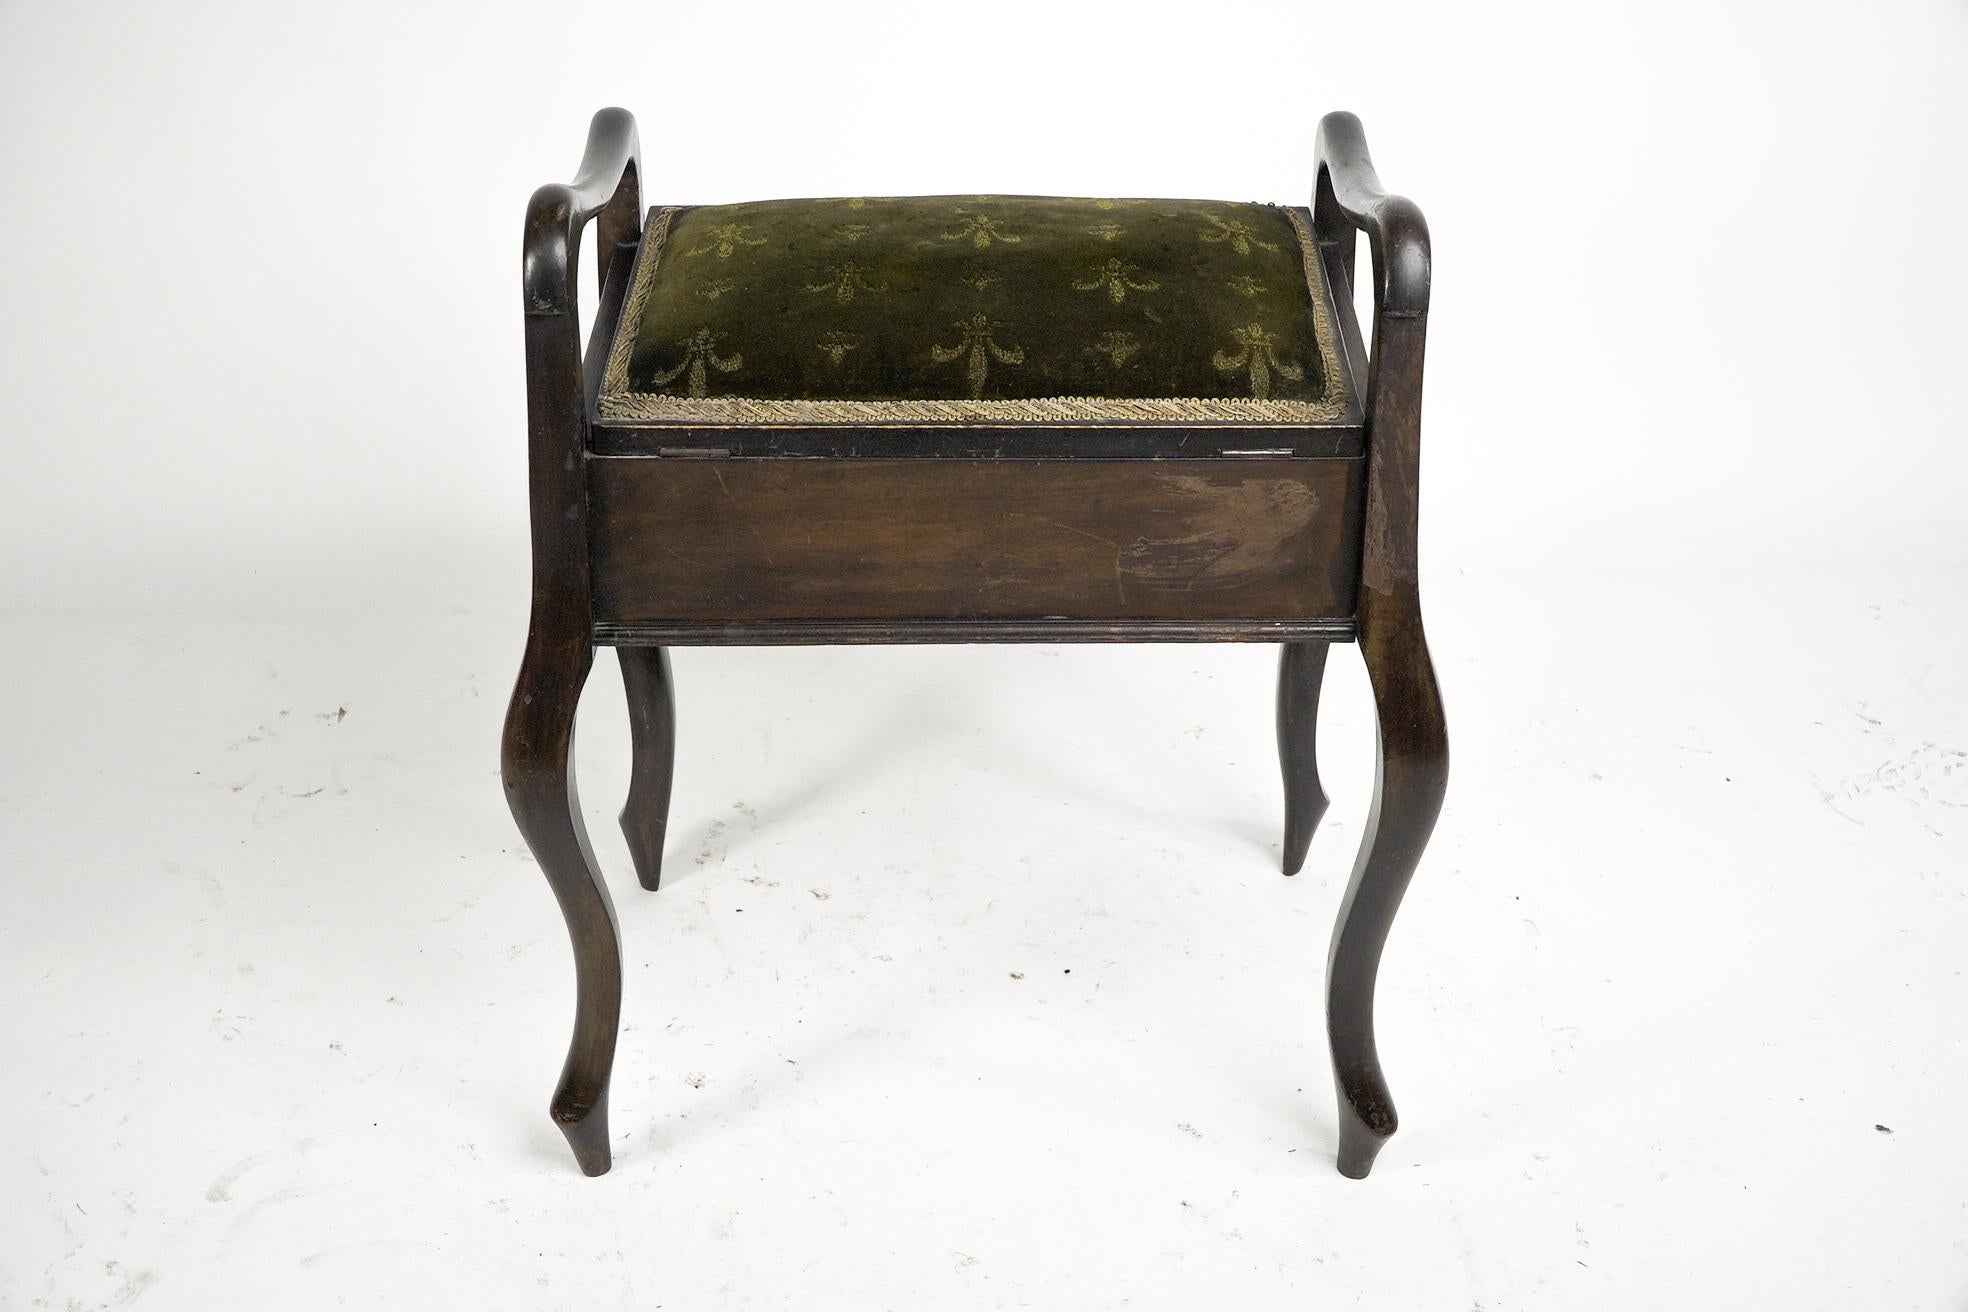 Early 20th Century An Edwardian stained Beech piano stool with period green fleur de lys fabric.